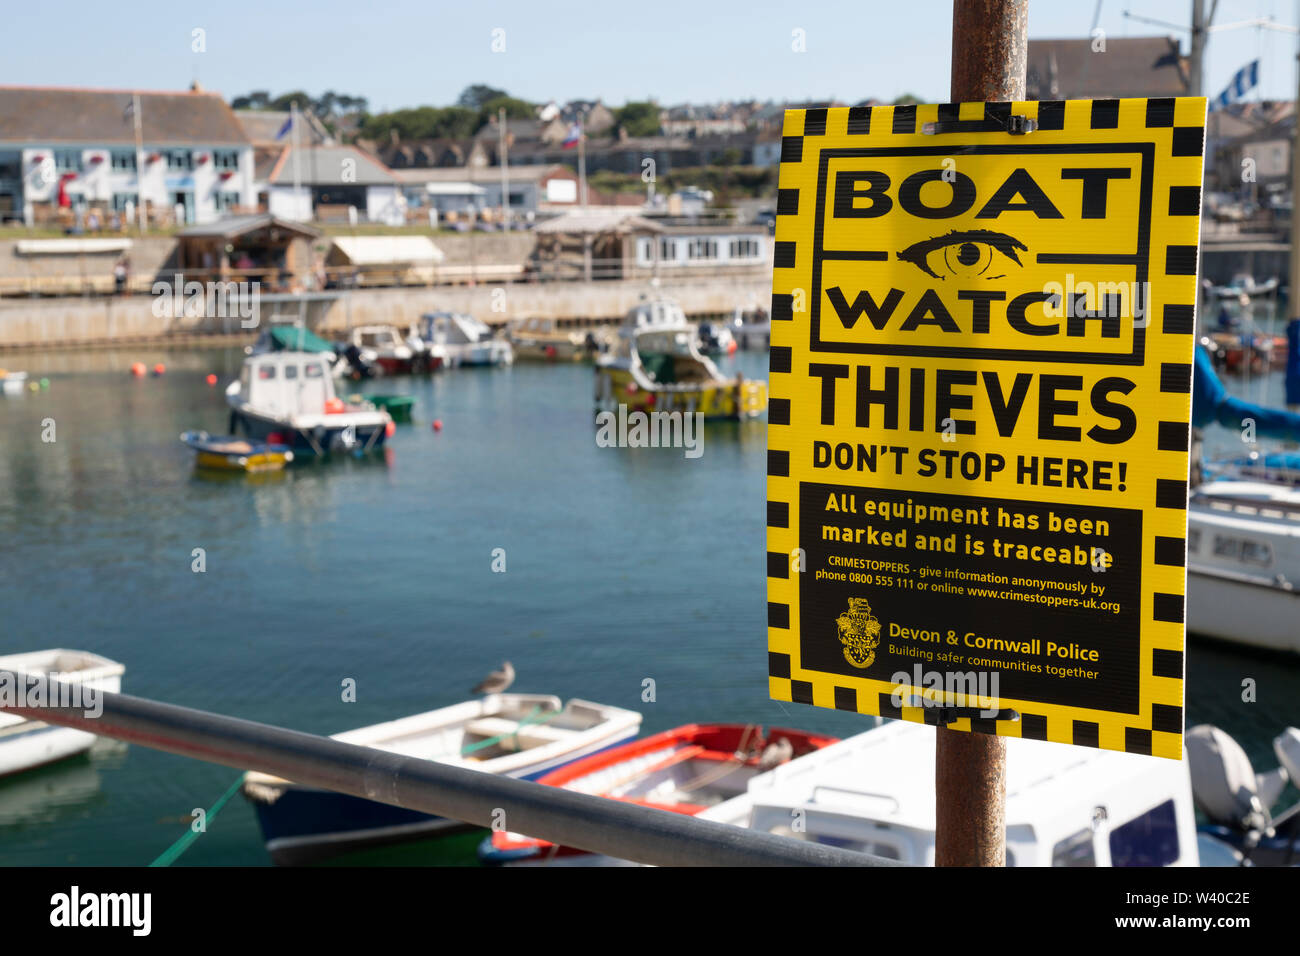 A sign saying Boat Watch. Thieves Don't Stop Here, in the seaside harbour village of Porthleven in Cornwall, England. Stock Photo